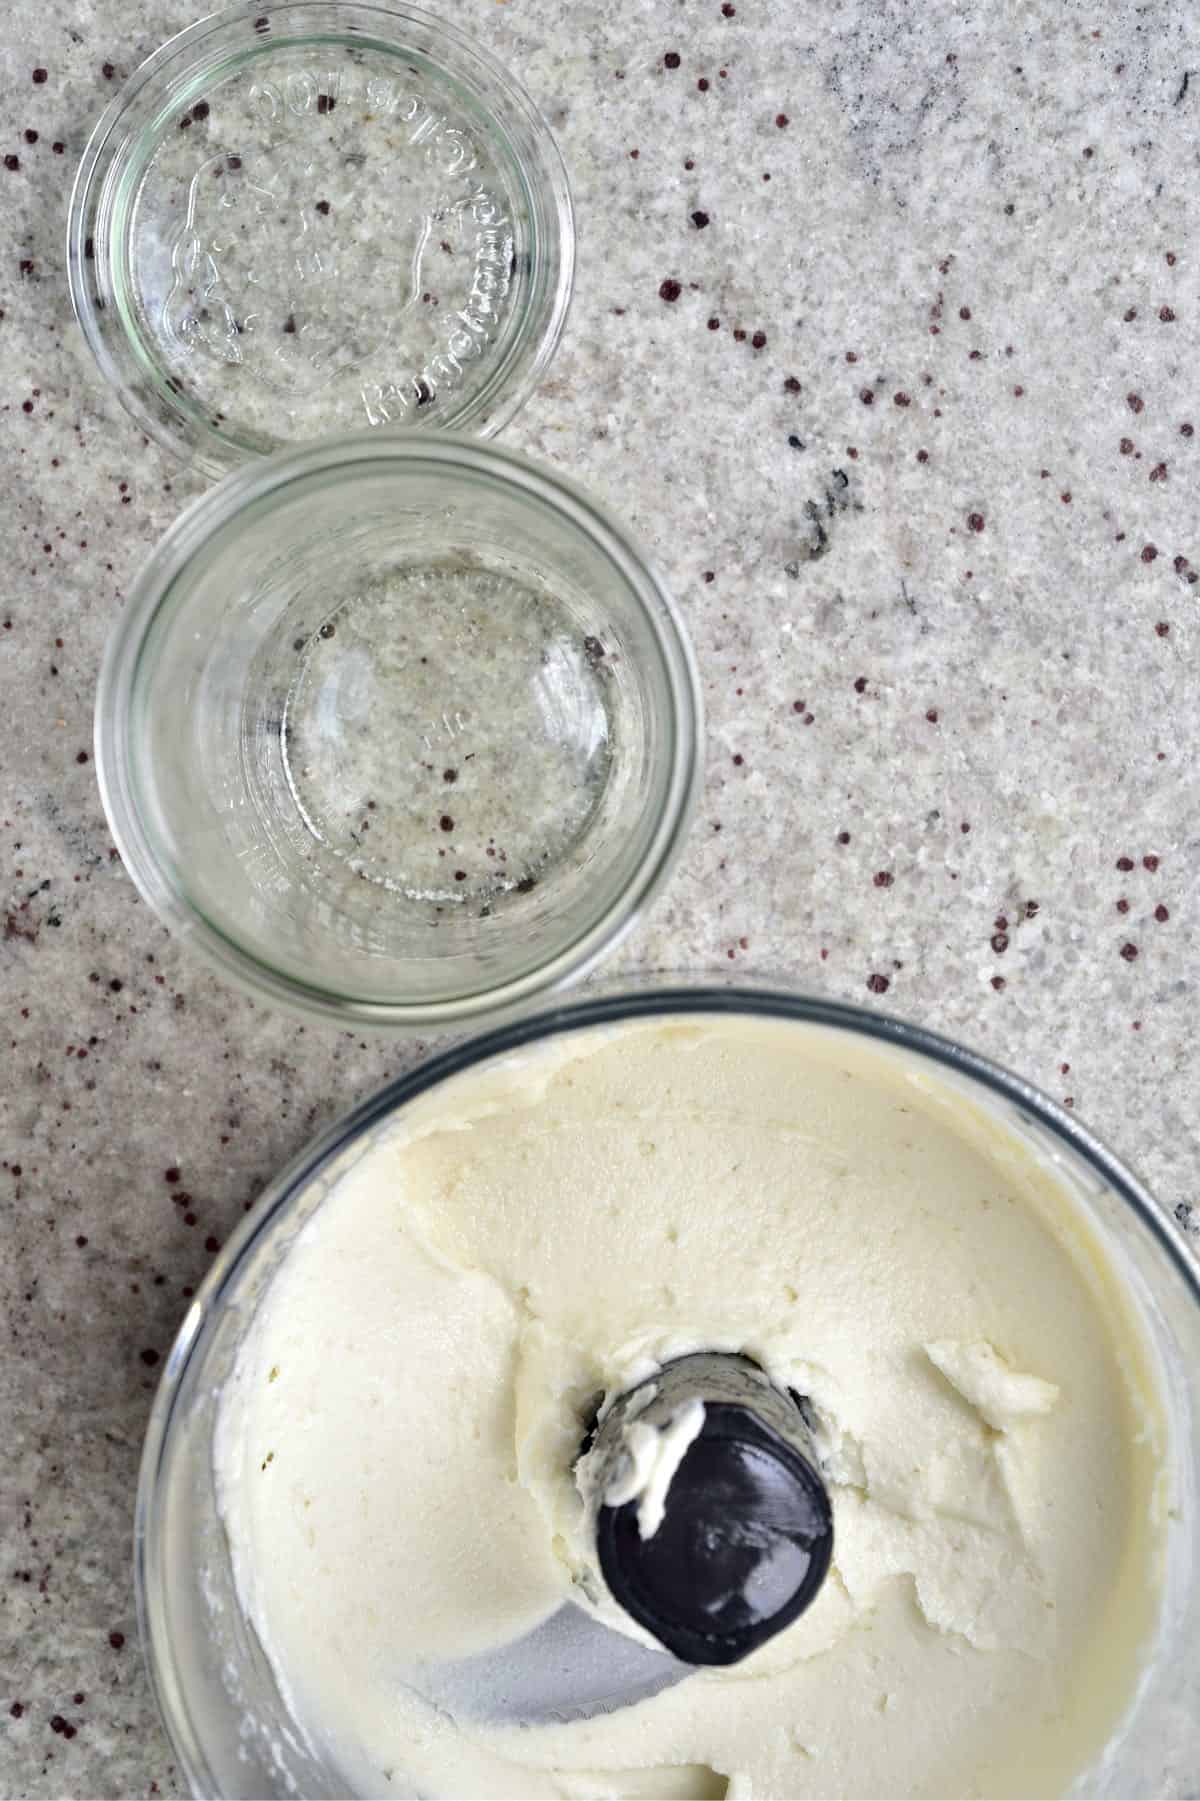 Food processor with garlic sauce and an empty jar